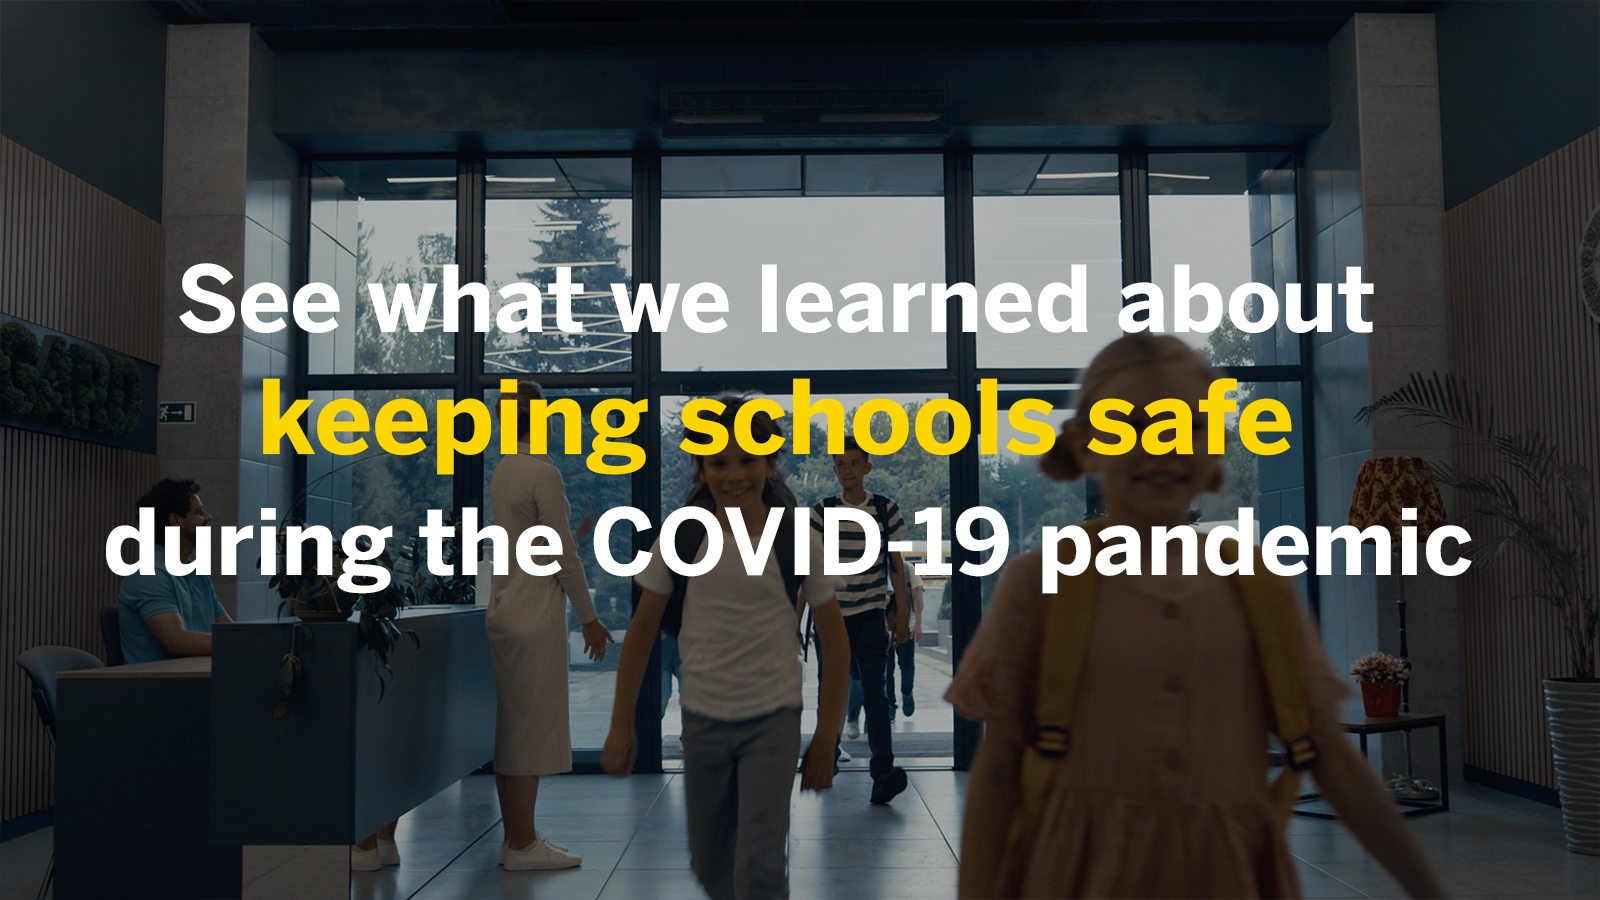 Children in school hallway with text "See what we learned about keeping schools safe during the COVID-19 pandemic." Clicking opens publication in a new tab.